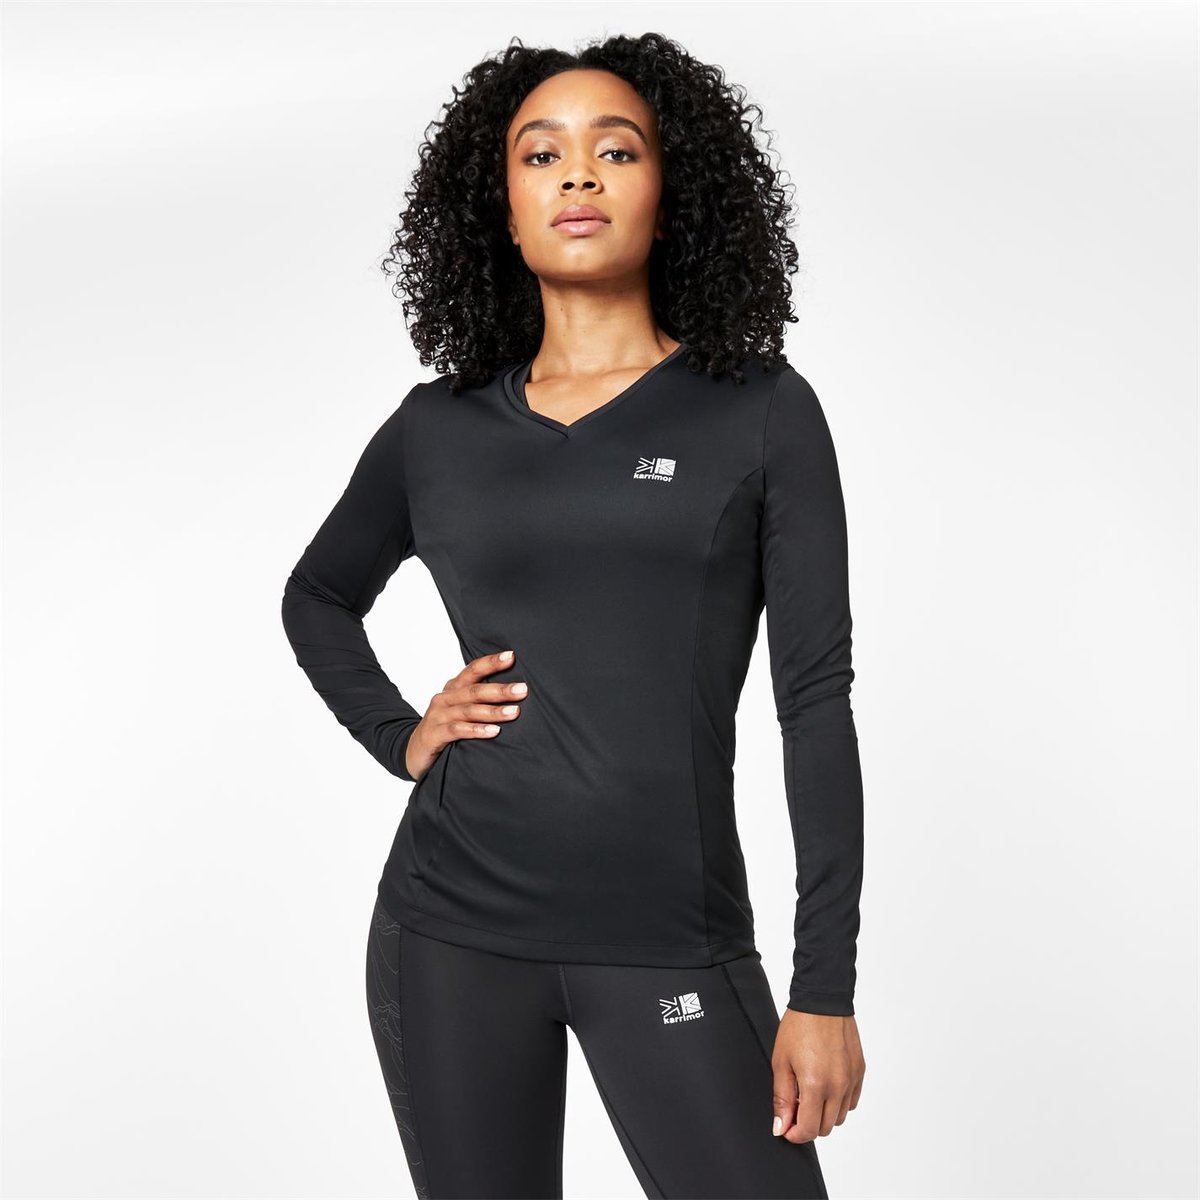 Black Karrimor Womens Thermal Running Tights - Get The Label